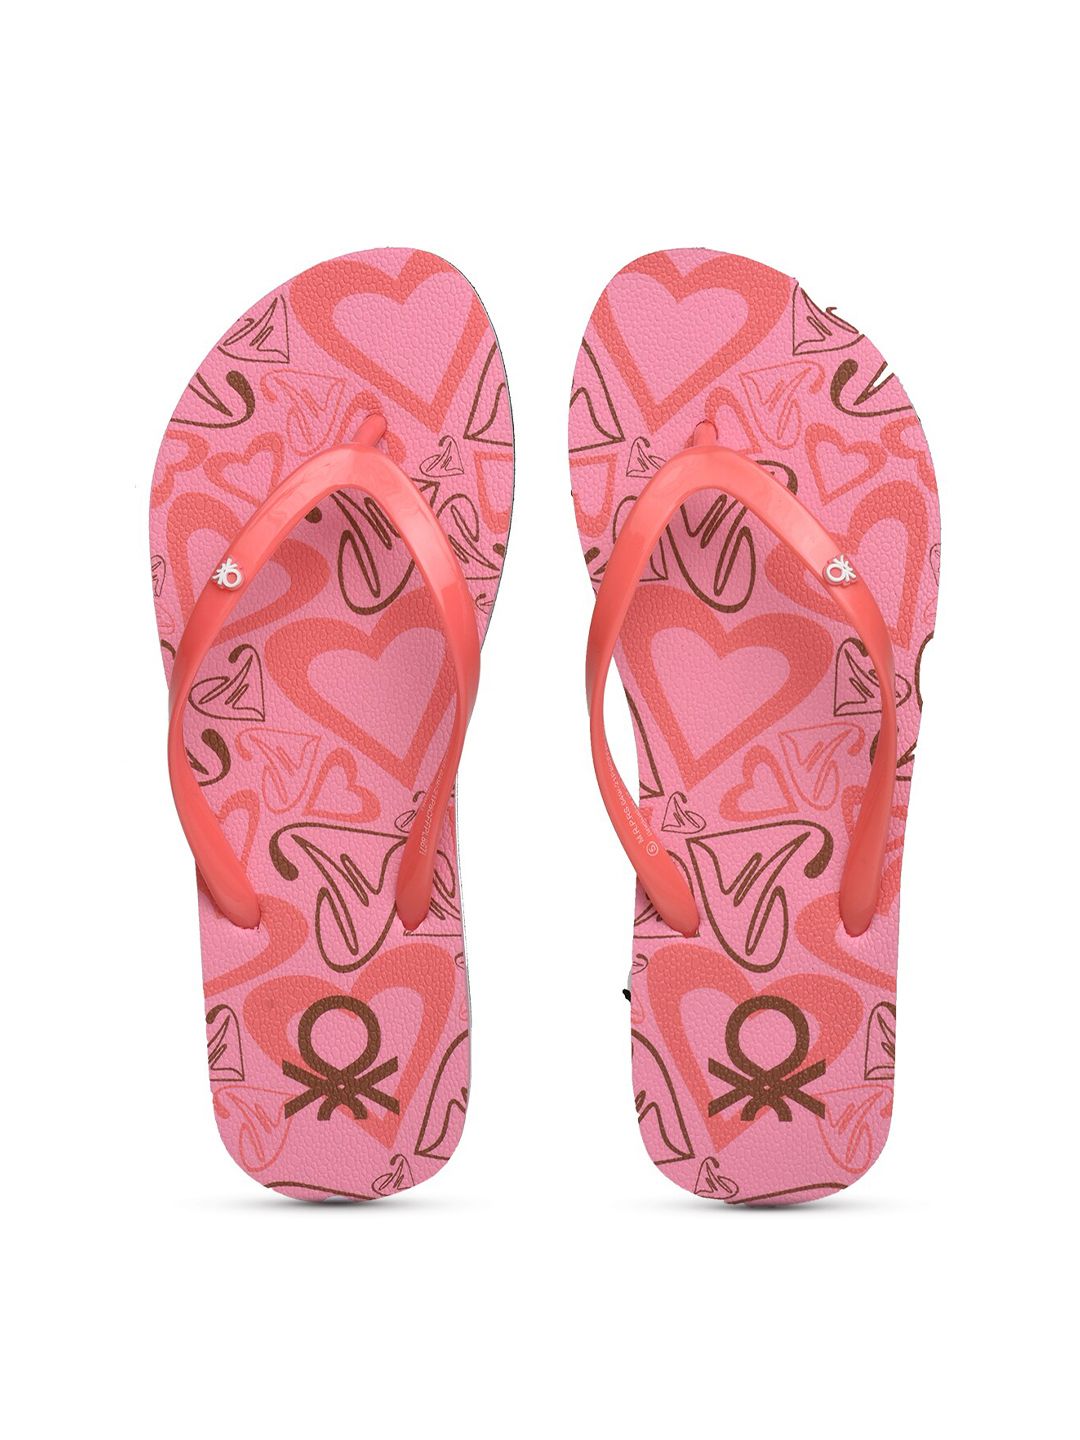 United Colors of Benetton Women Pink & Brown Printed Room Slippers Price in India